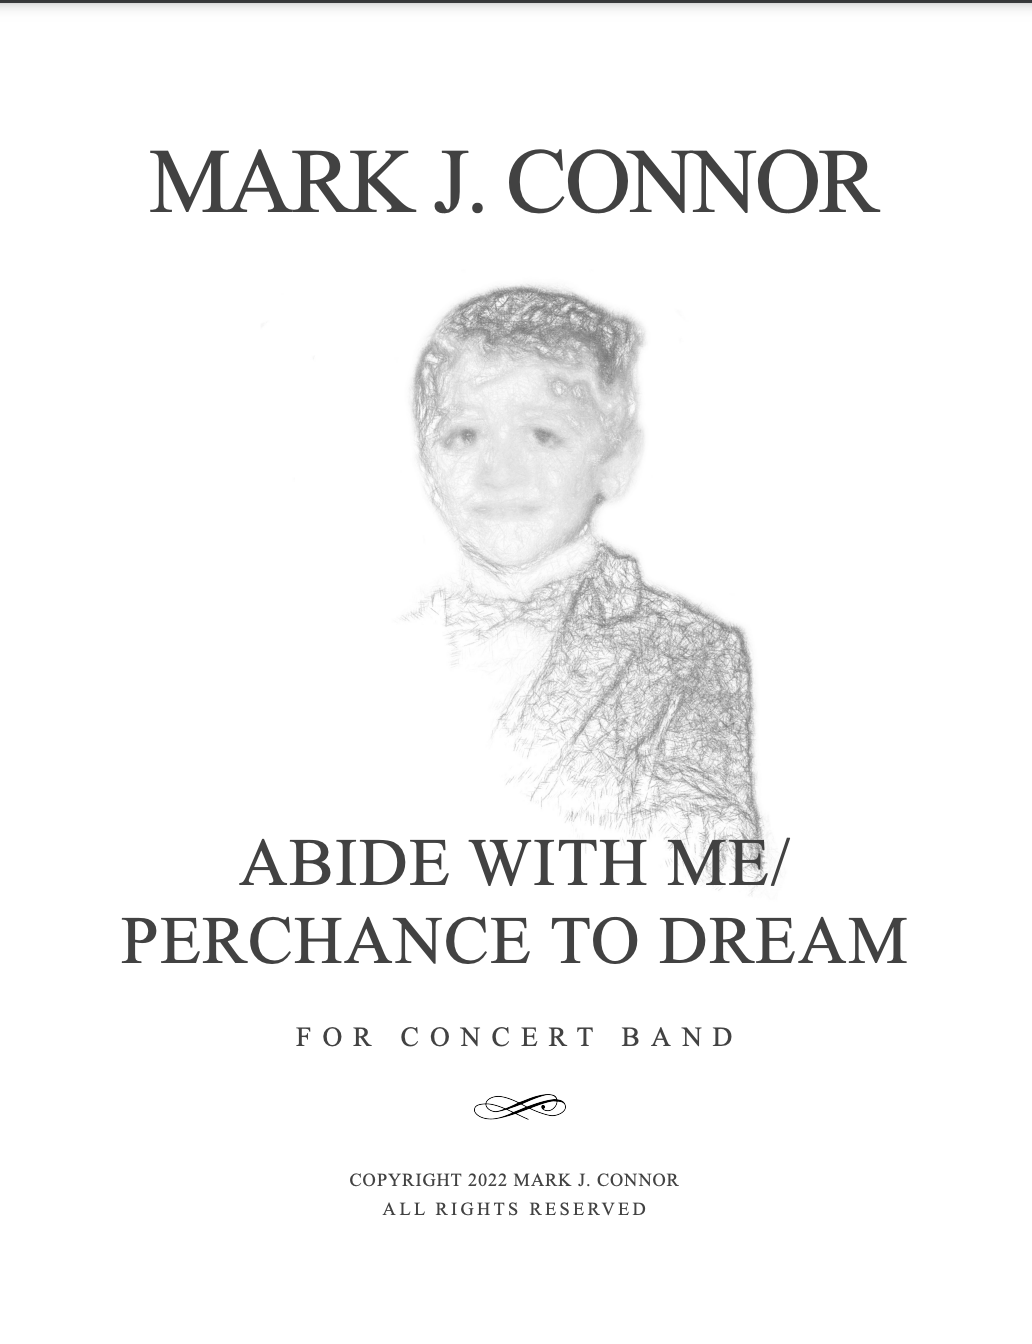 Abide With Me/Perchance To Dream by Mark Connor